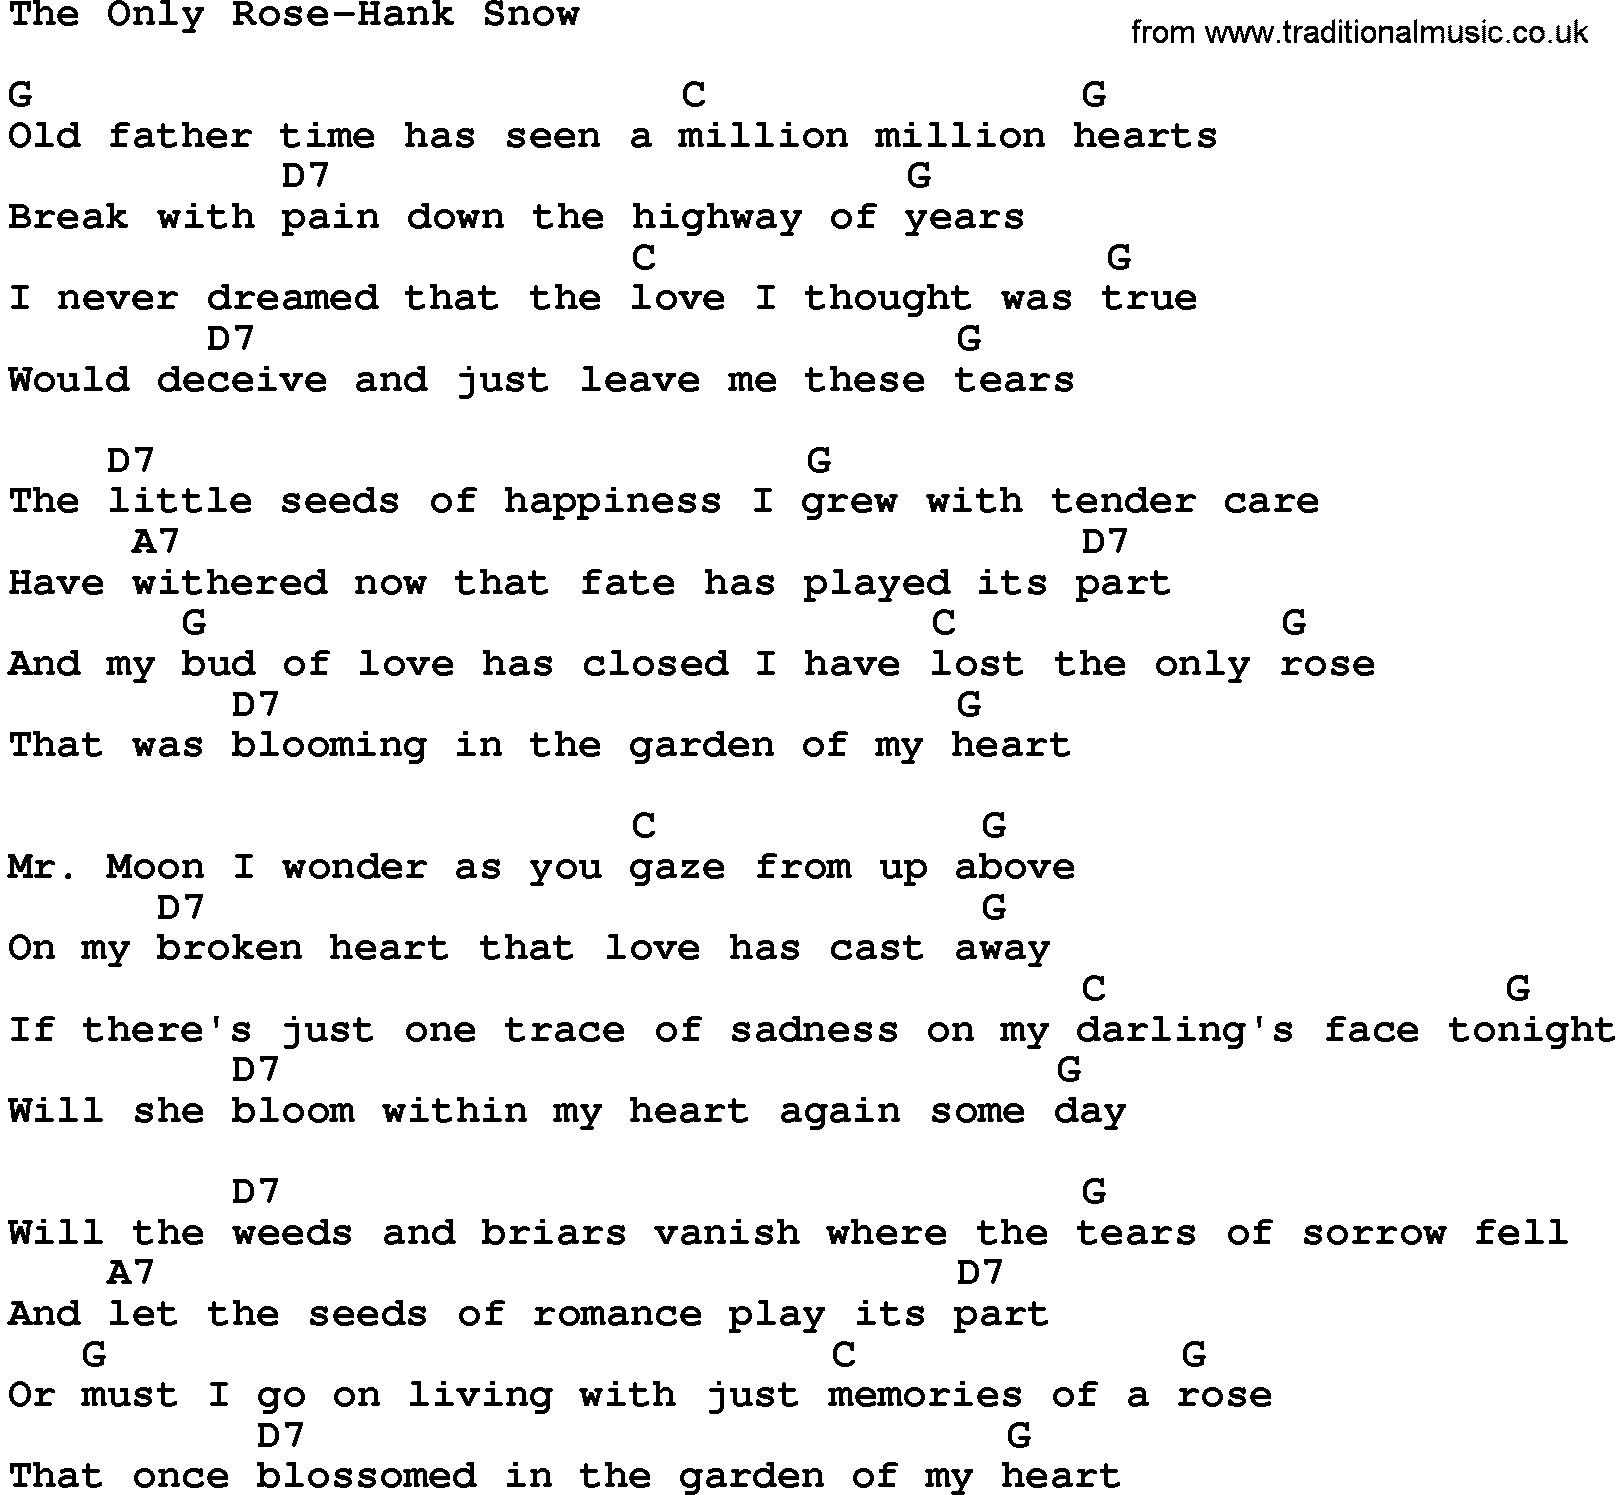 Country music song: The Only Rose-Hank Snow lyrics and chords